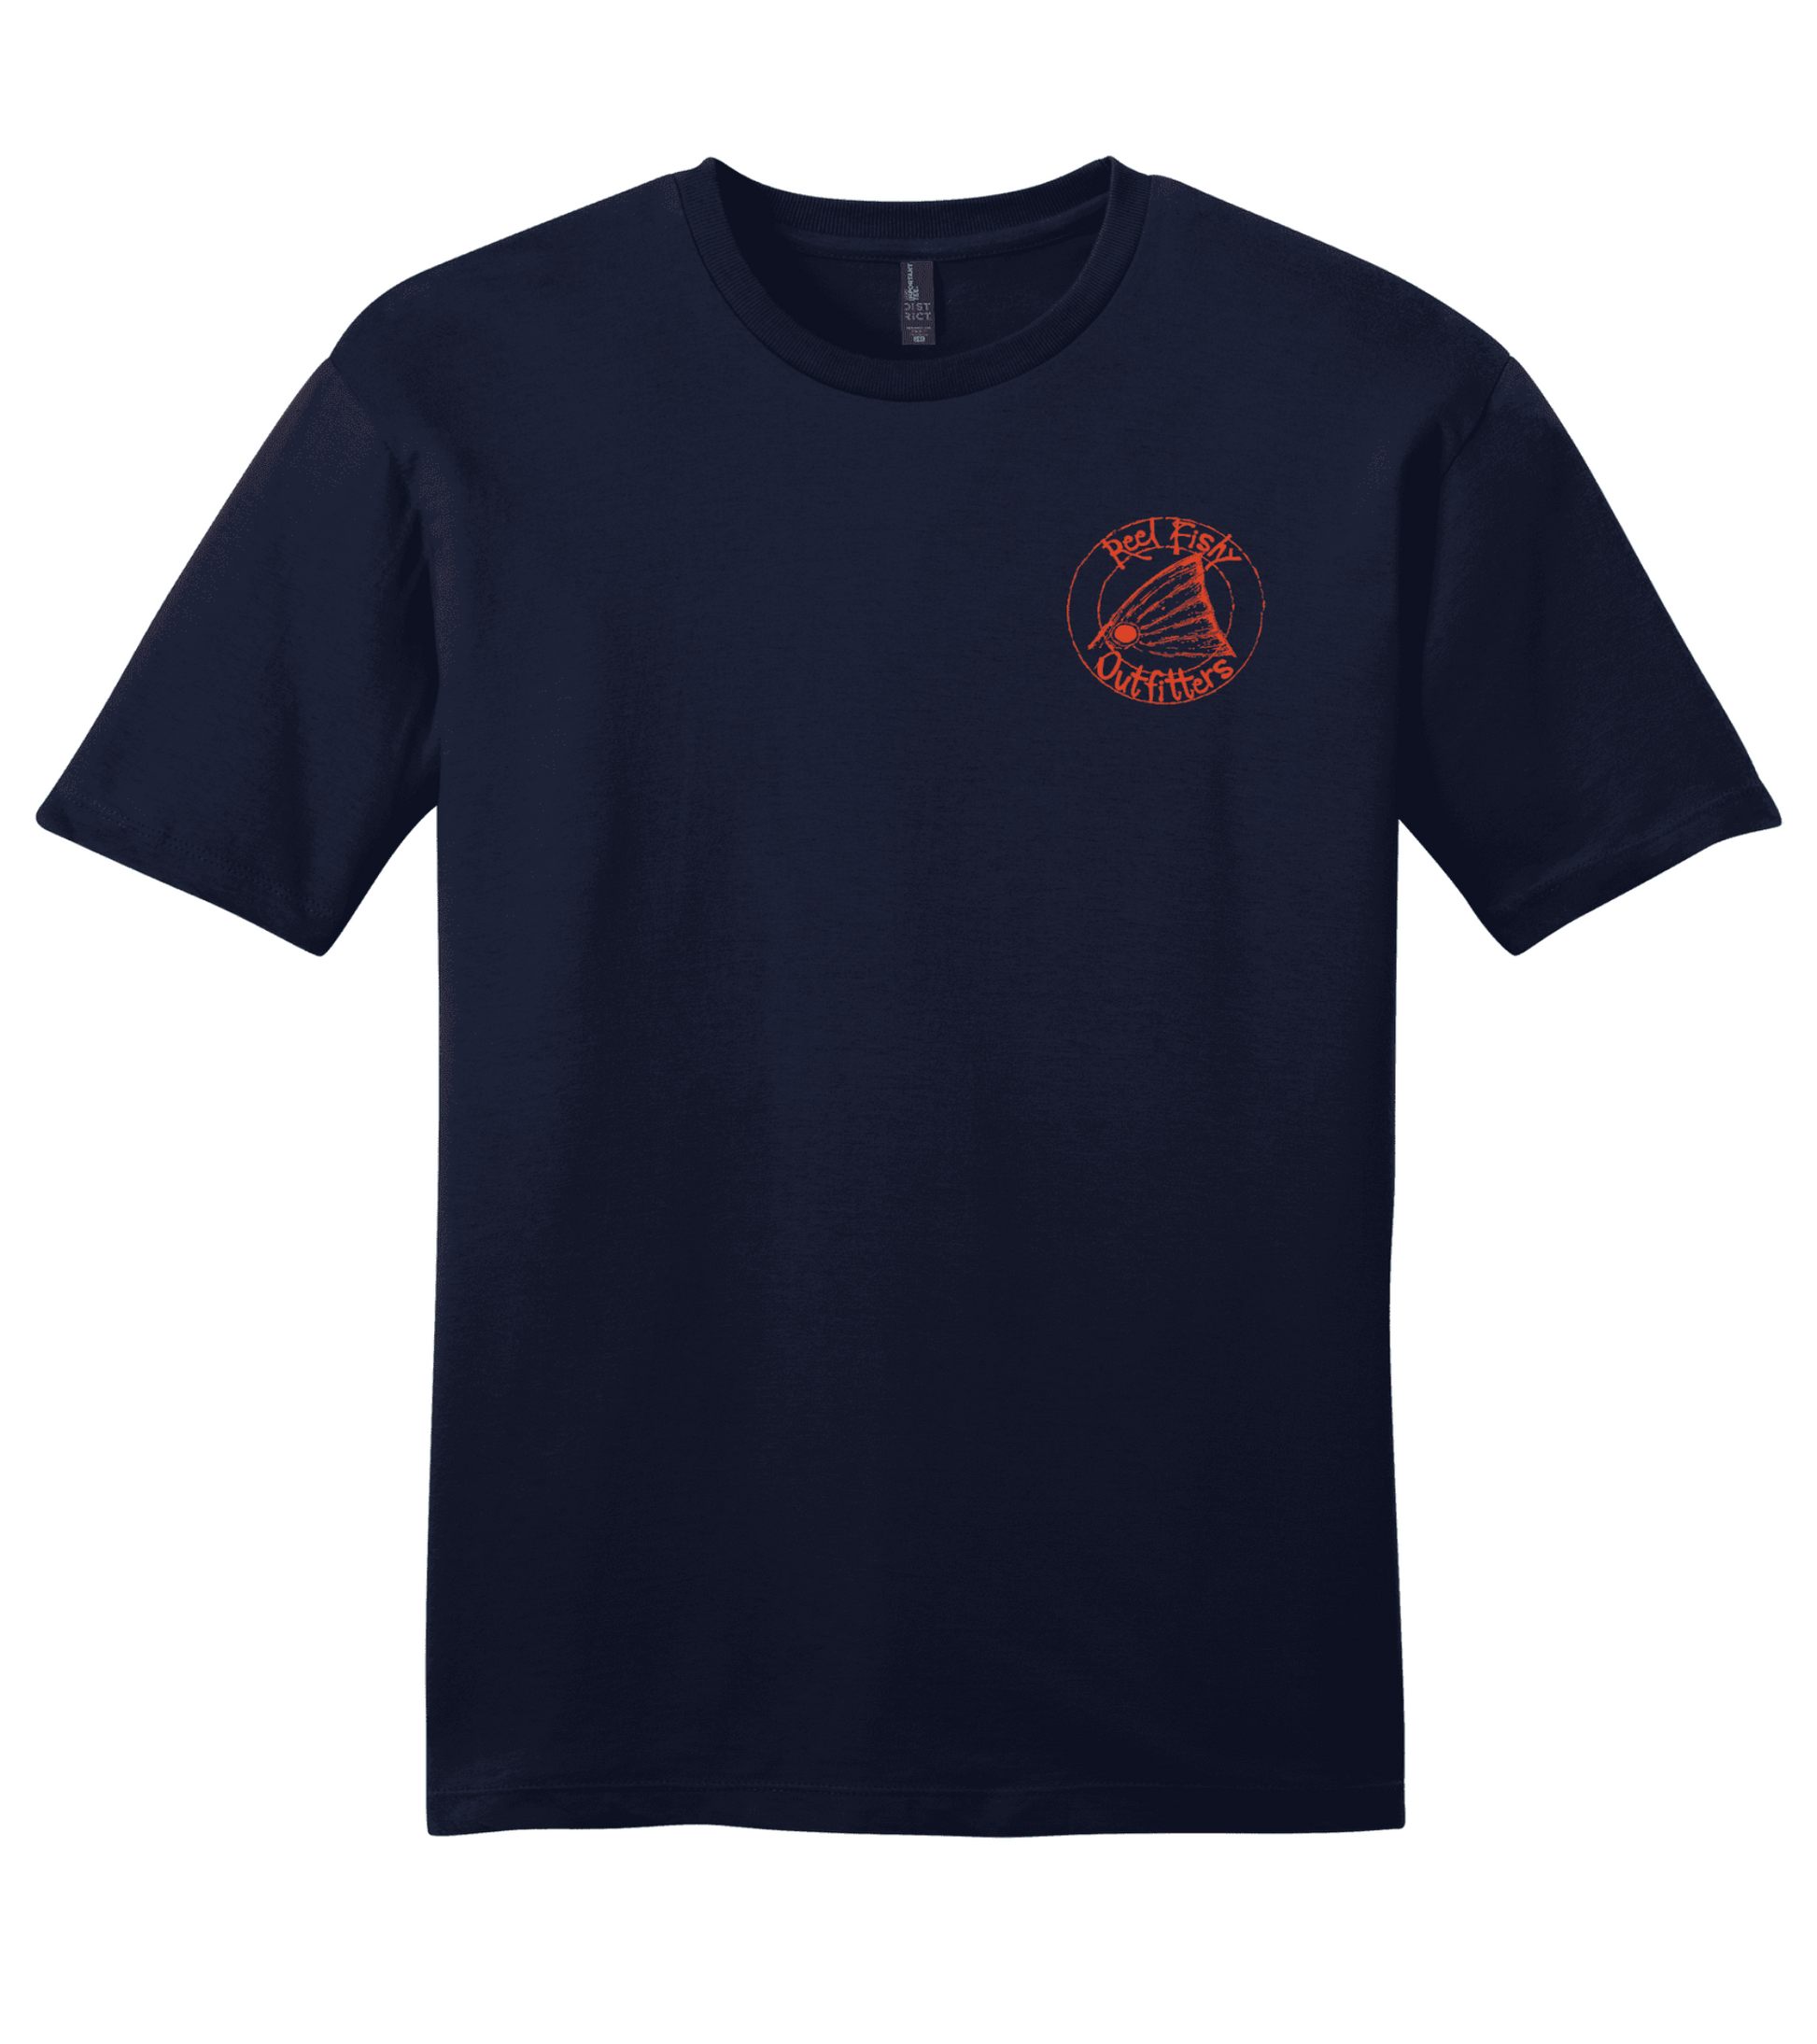 Redfish Cotton T-shirt in Charcoal - Front with Reel Fishy Outfitters logo